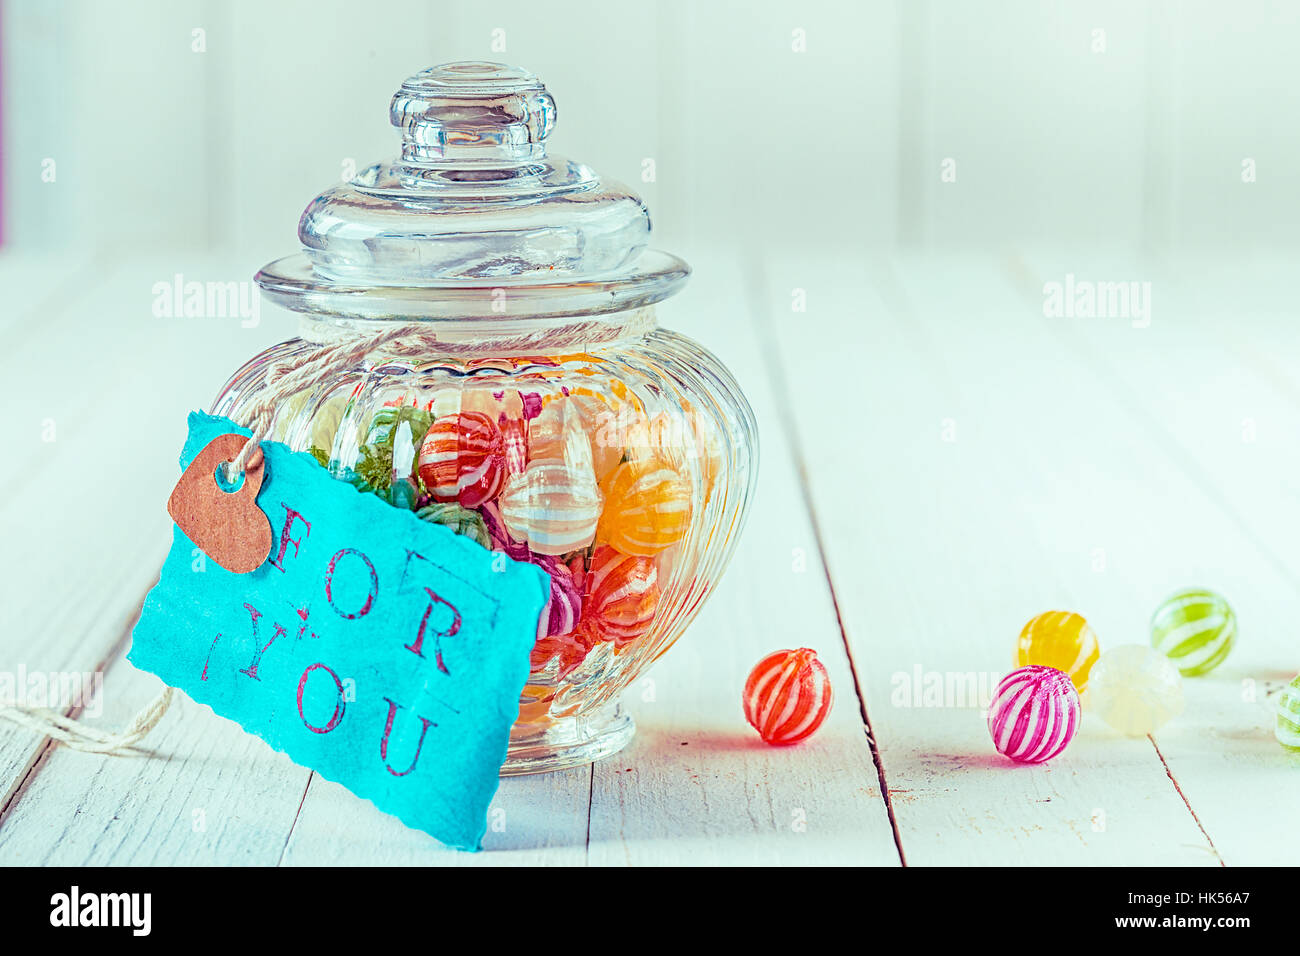 glass, chalice, tumbler, present, beautiful, beauteously, nice, sweets, model, Stock Photo